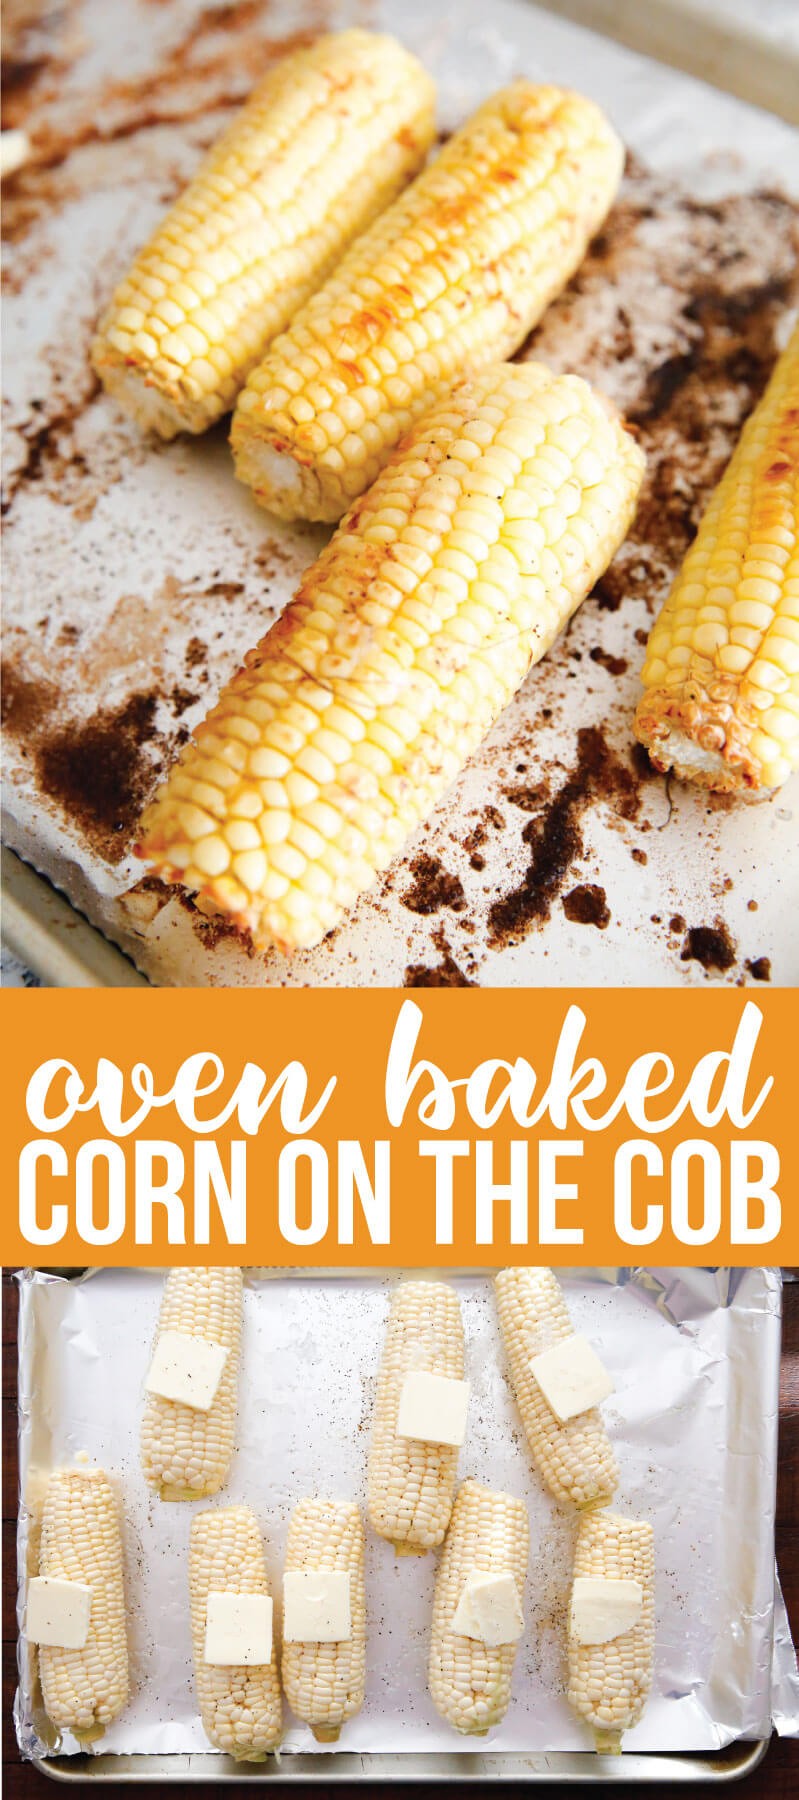 The very best way to make corn - Oven Baked Corn on the Cob - the how to from www.thirtyhandmadedays.com